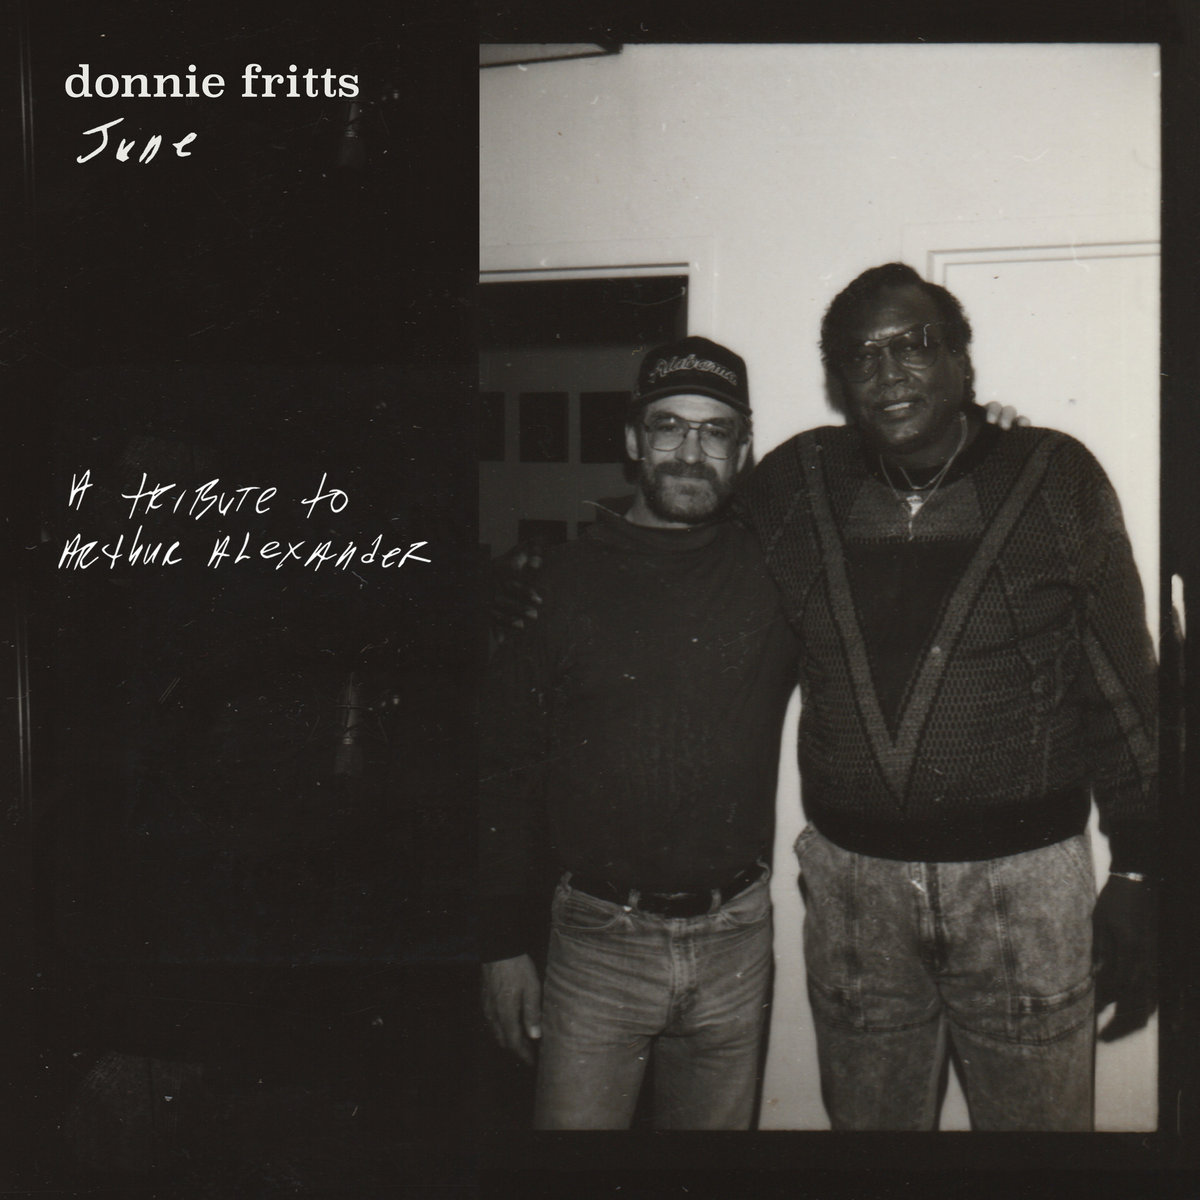 DONNIE FRITTS / ドニー・フリッツ / JUNE: A TRIBUTE TO ARTHUR ALEXANDER